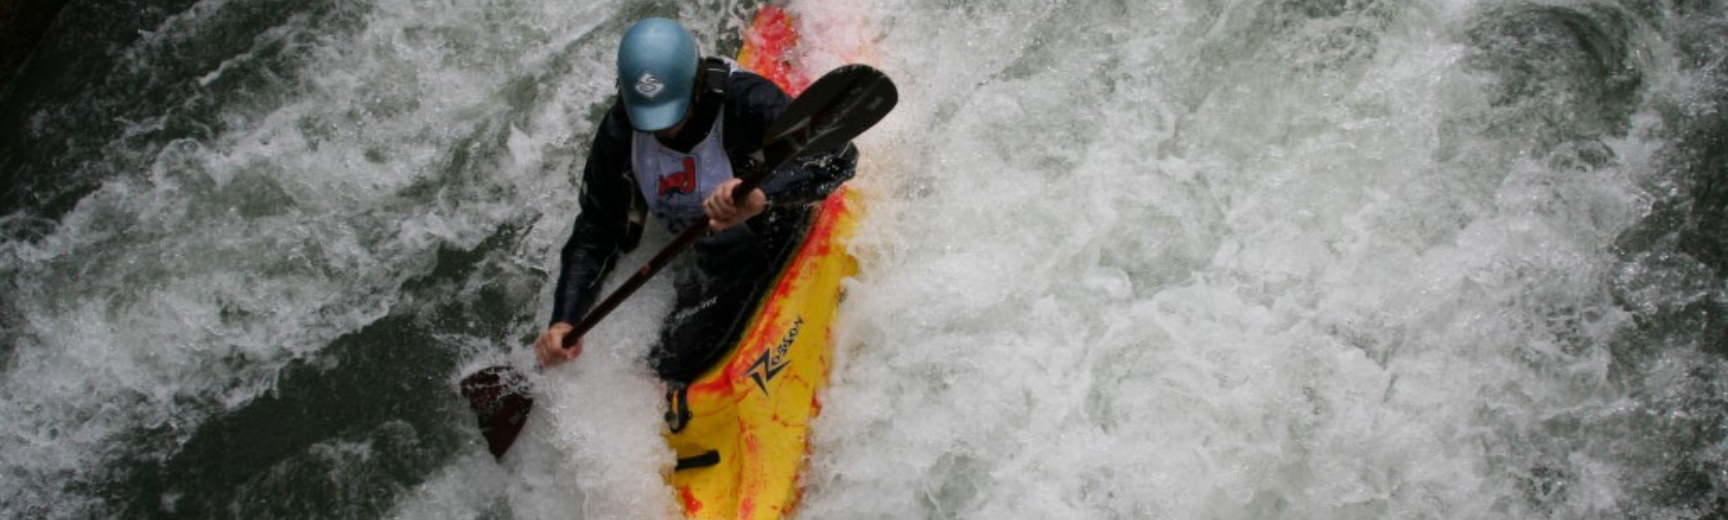 A kayaker tackling a steep white water decent